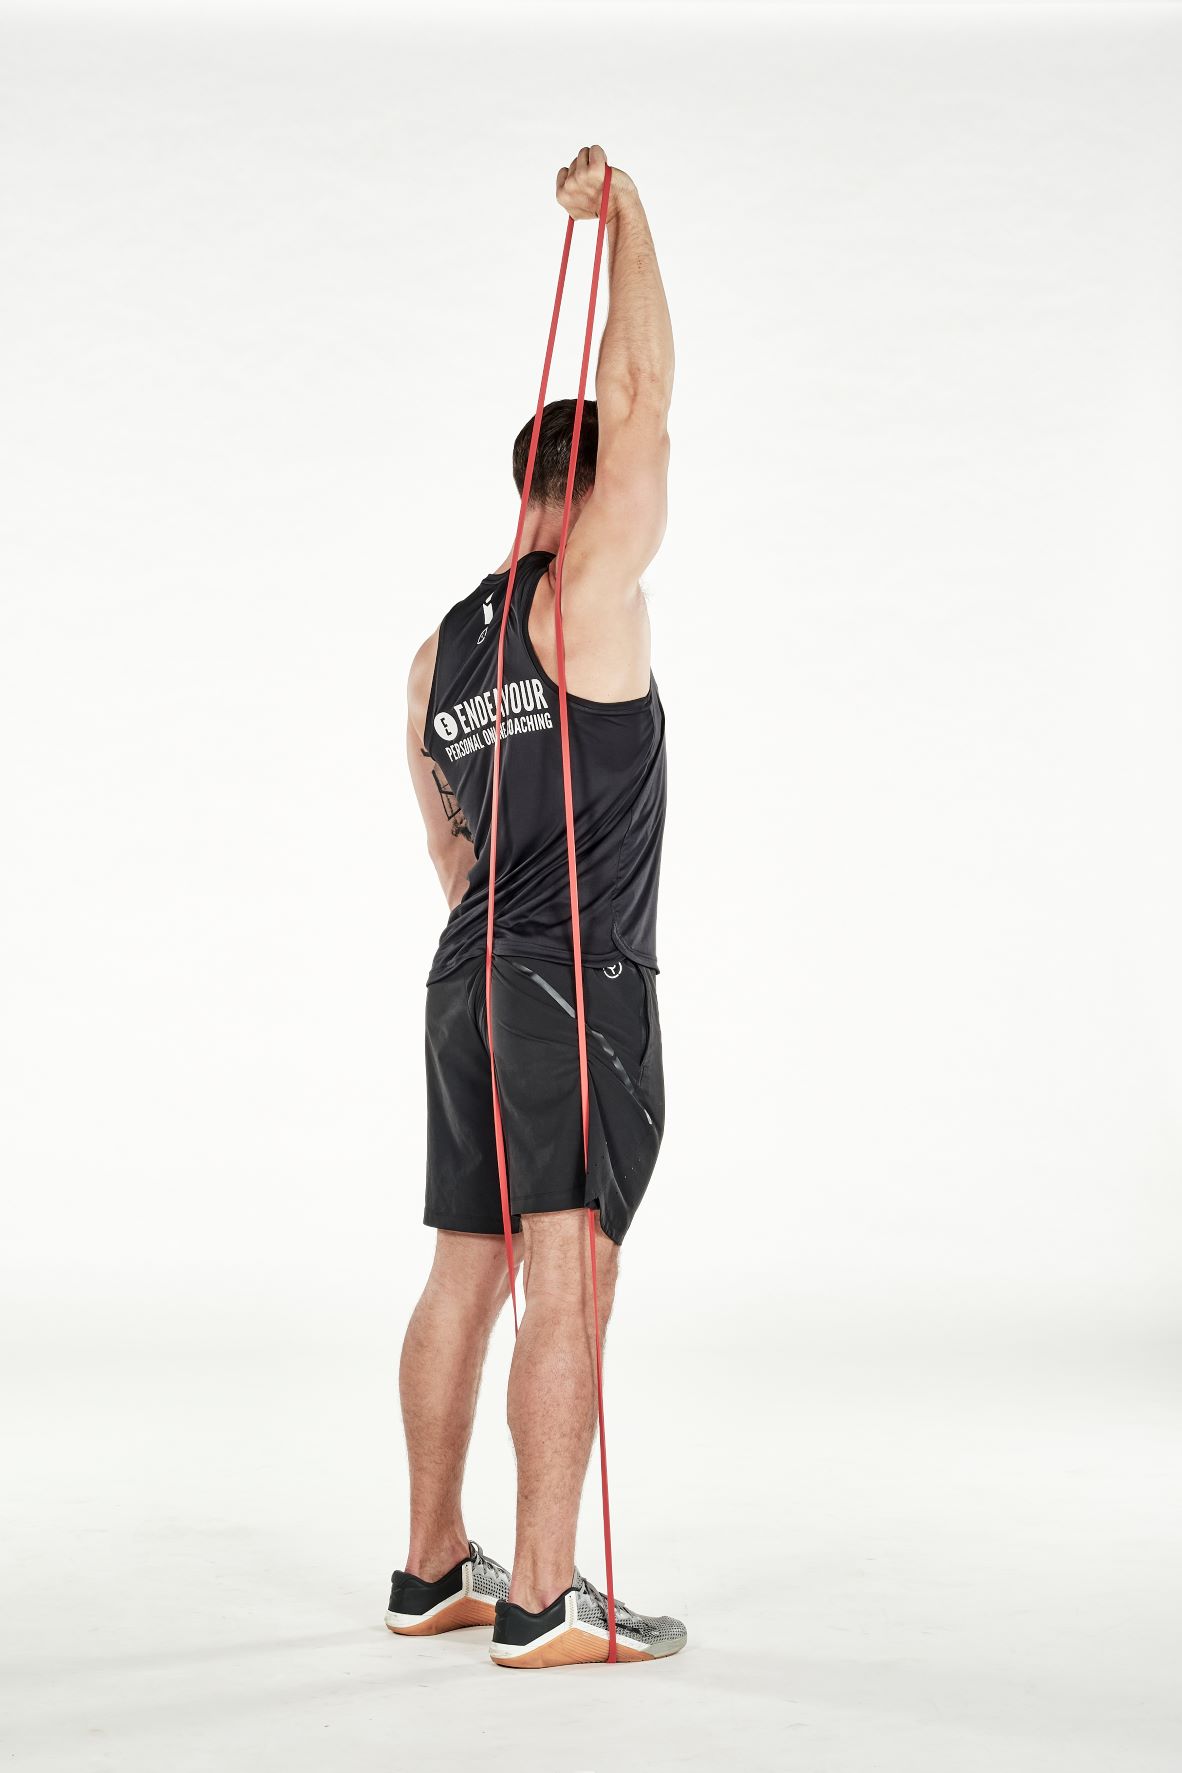 man demonstrating step two of single arm triceps extension; standing tall, his arm reaches behind his head to hold a resistance band that's held under one foot; his arm straightens as he pulls the band and reaches up; he wears a black fitness vest, black shorts and trainers